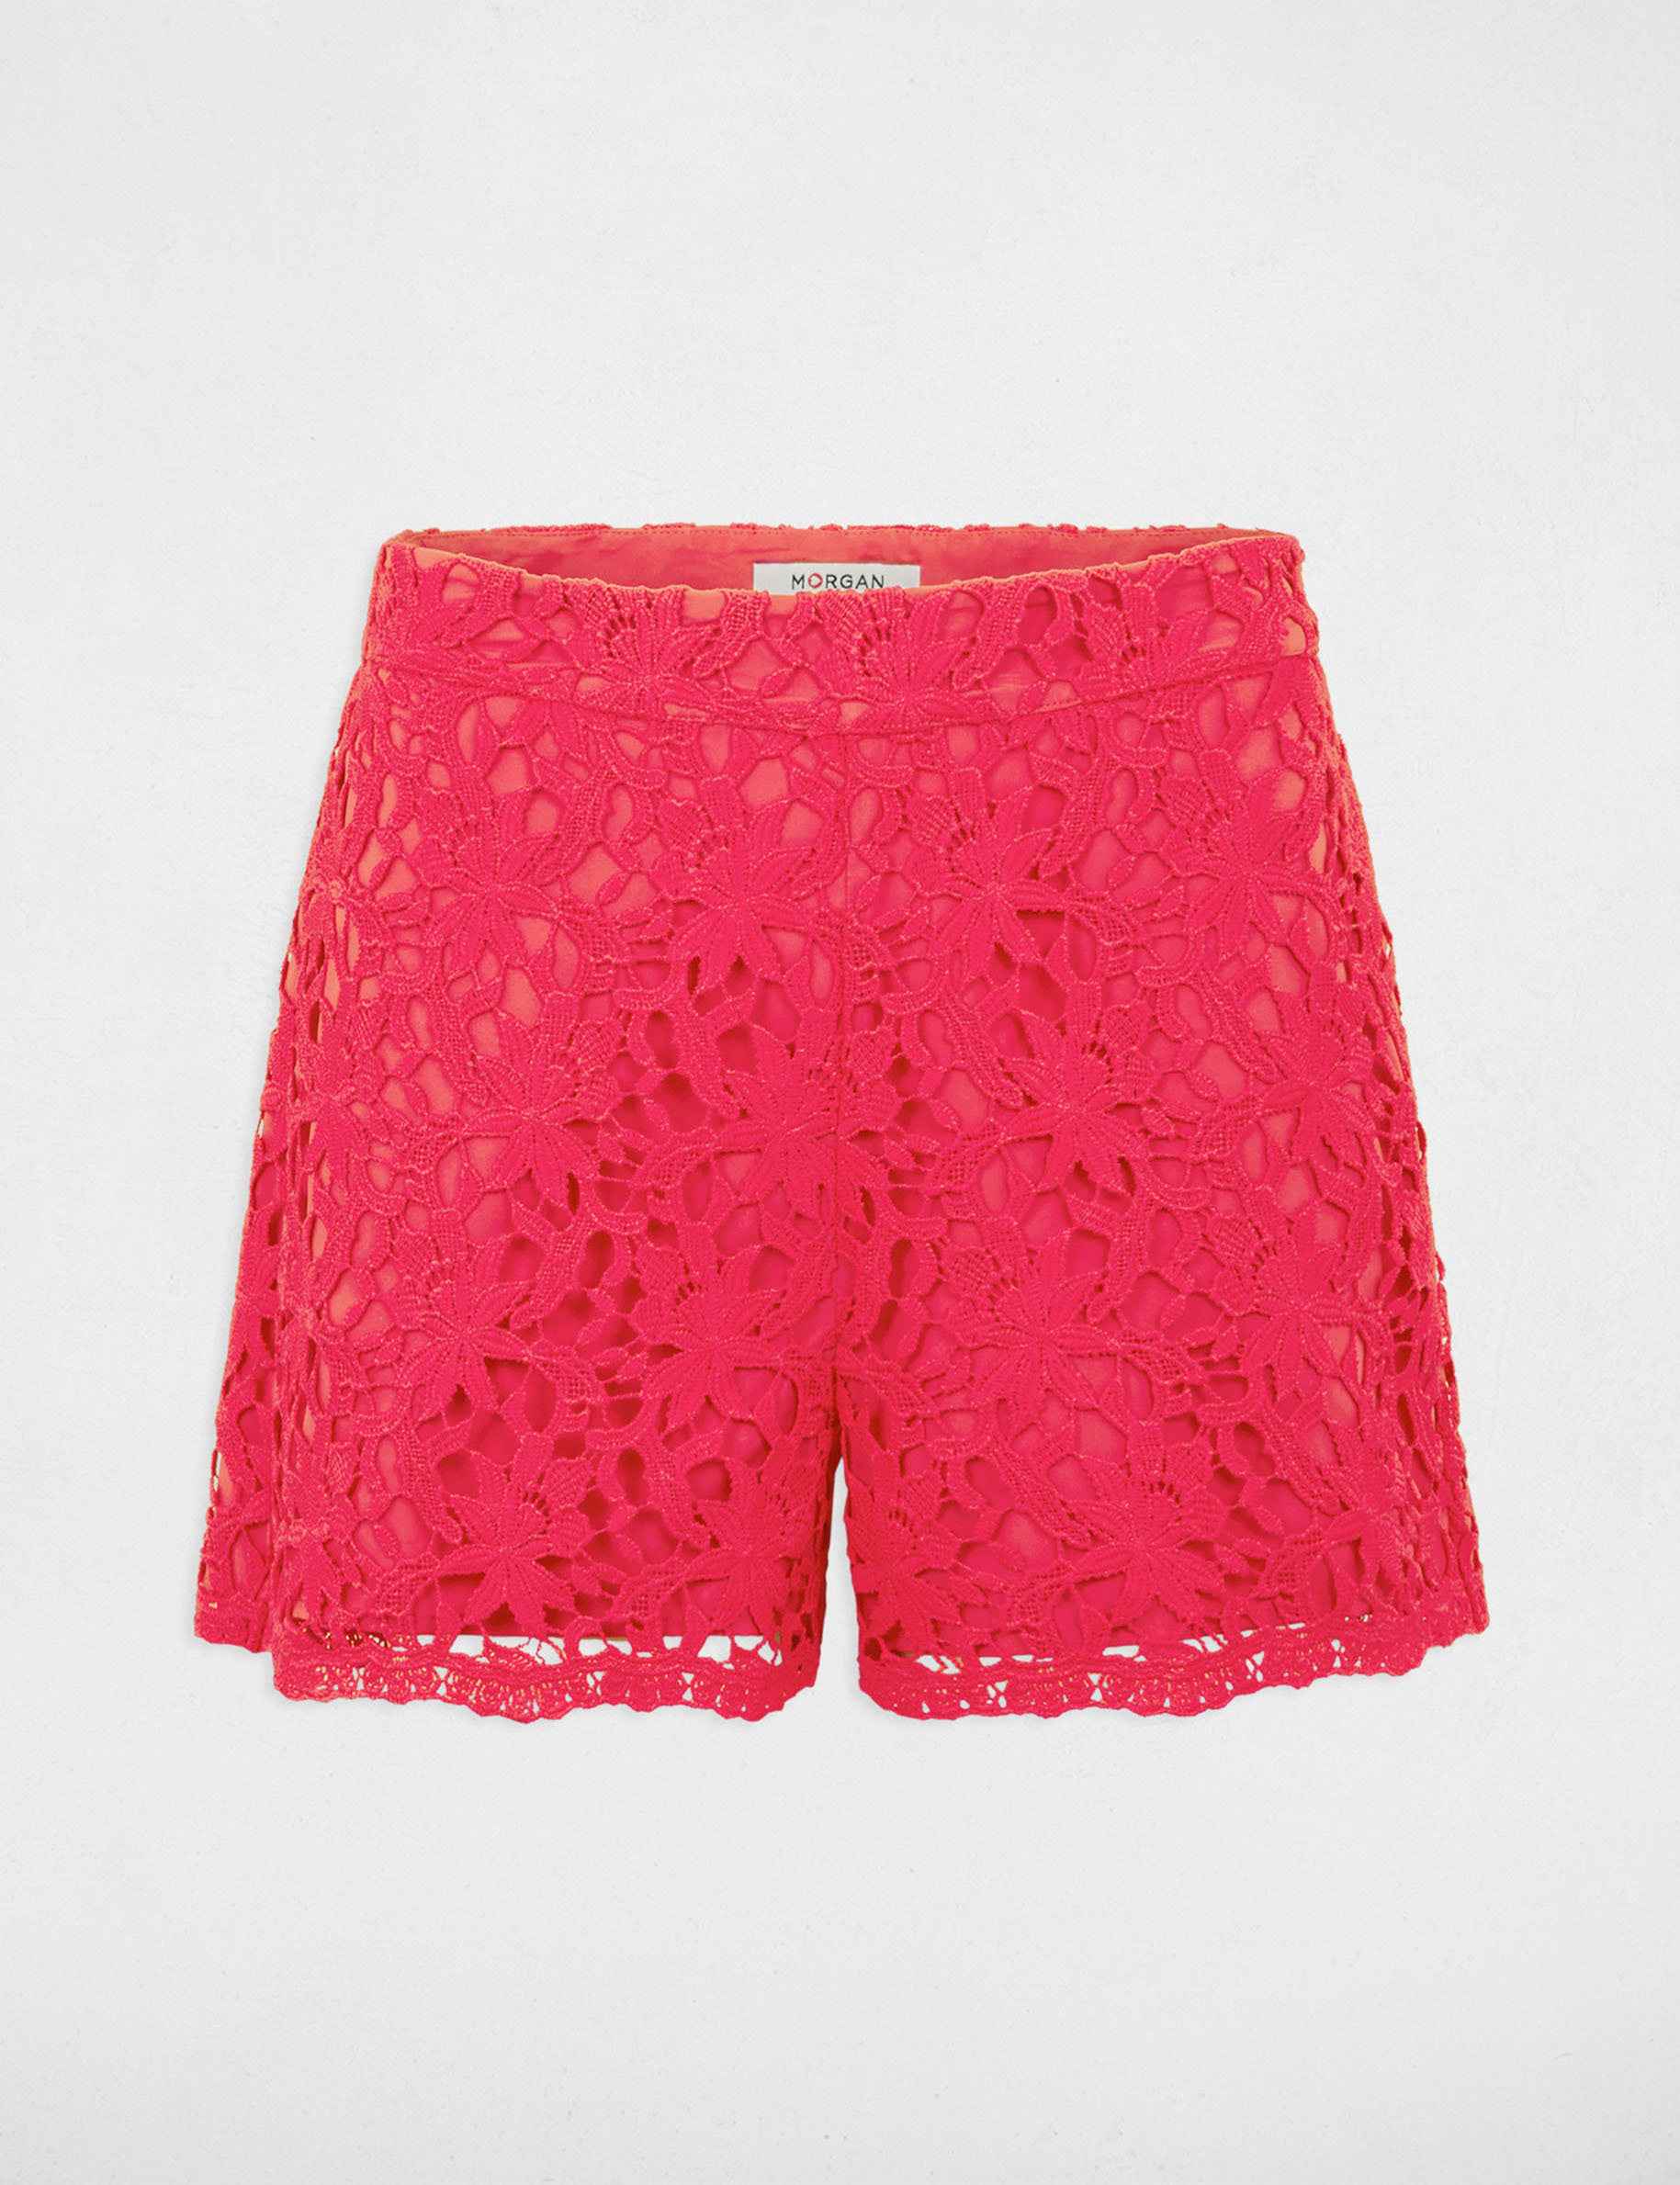 Fitted lace shorts raspberry ladies'